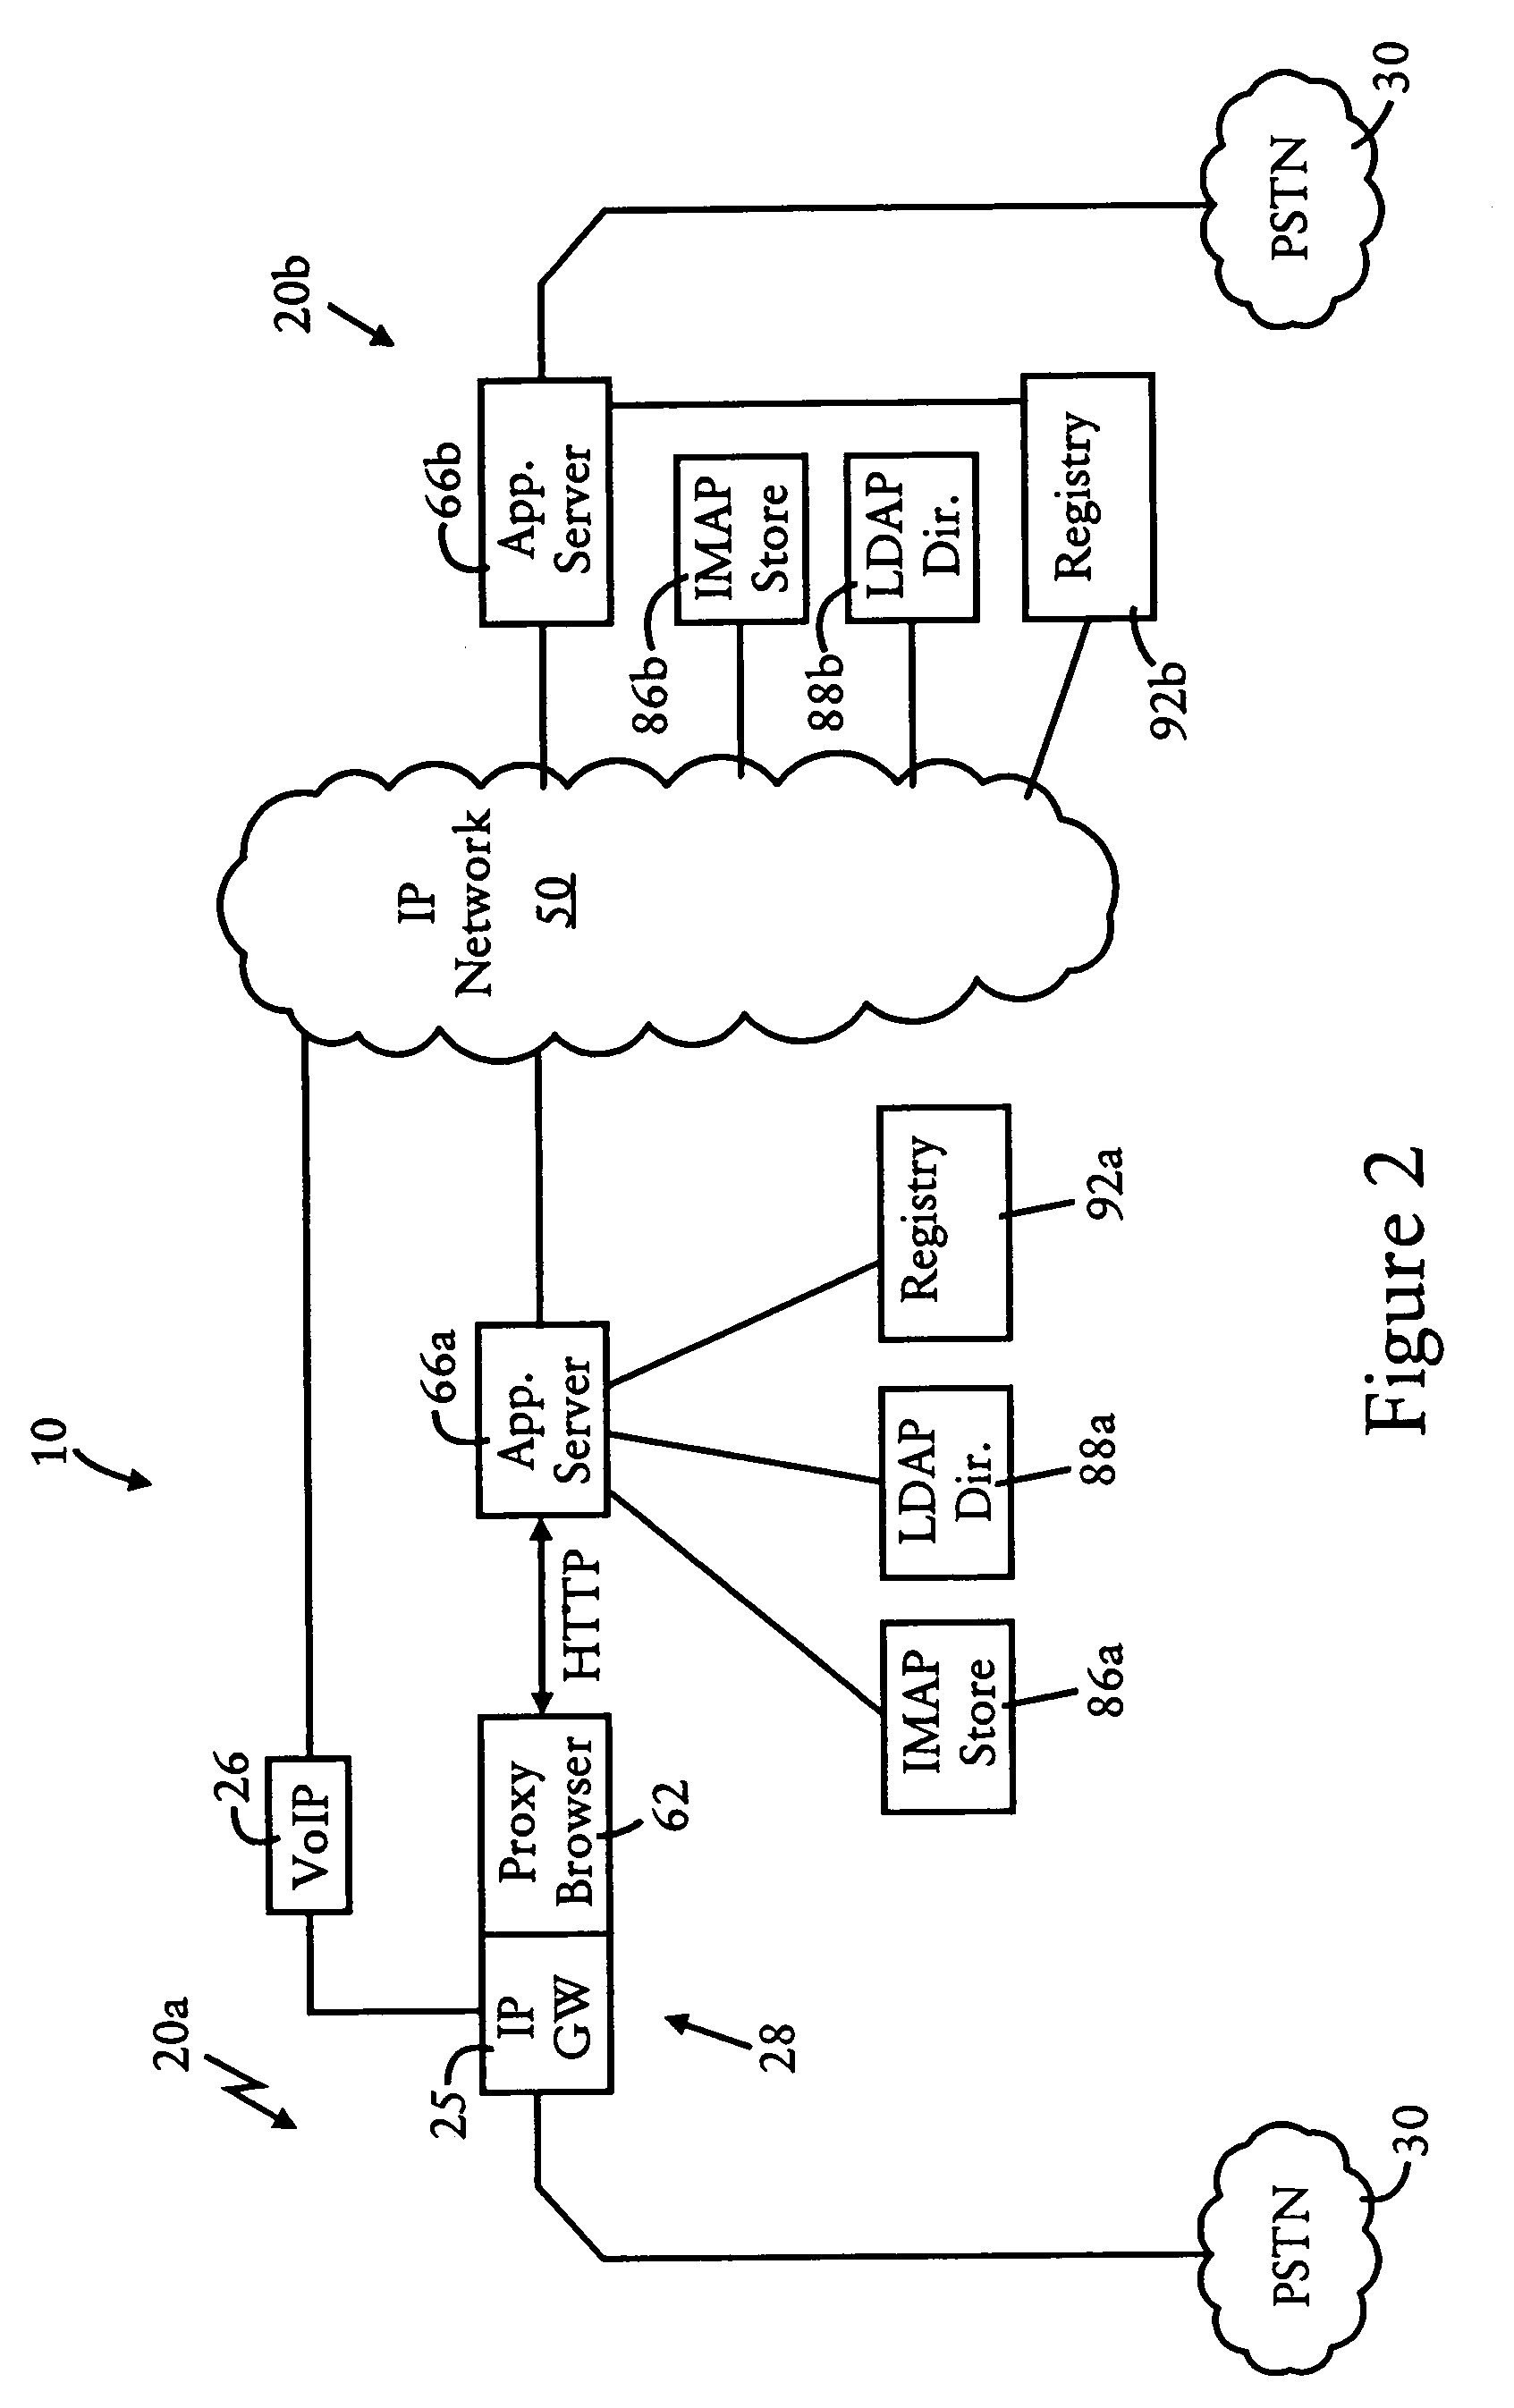 Unified messaging system configured for transport of encrypted messages